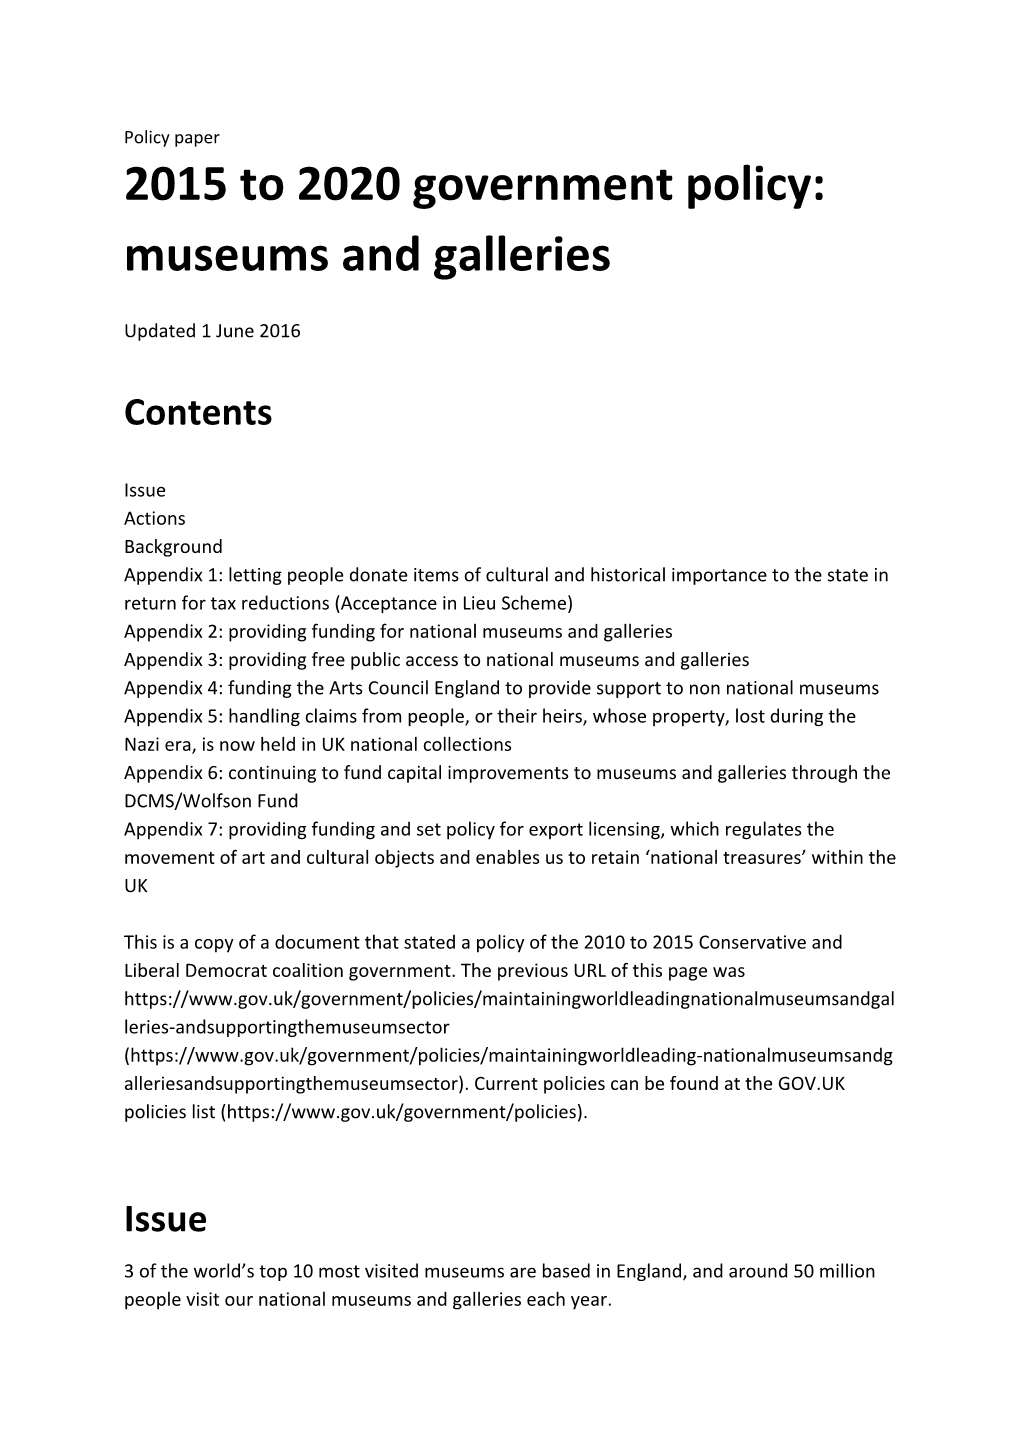 2015 to 2020 Government Policy: Museums and Galleries